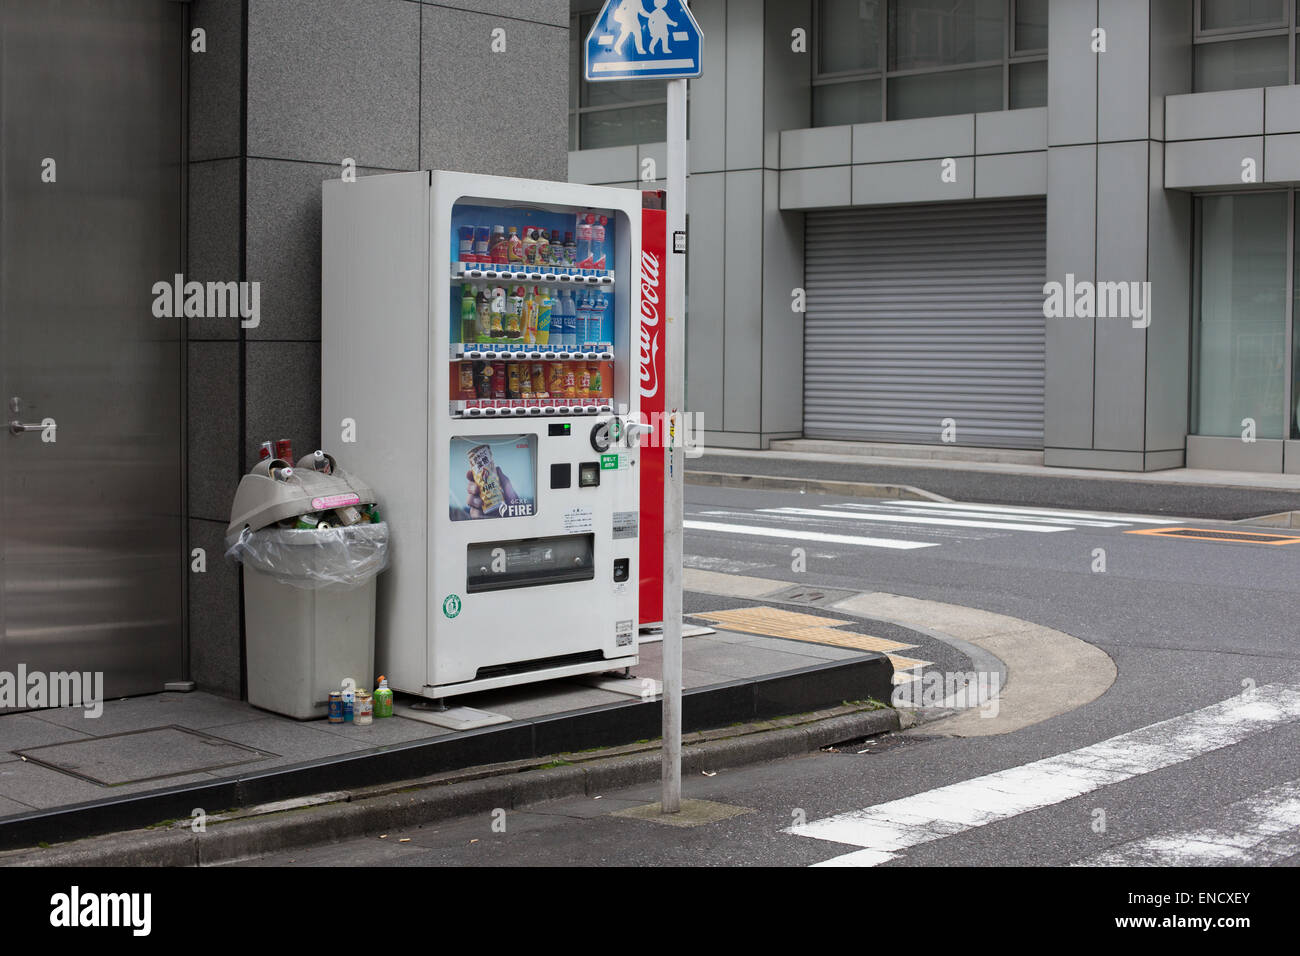 An over-flowing rubbish bin next to a drinks vending machine, Tokyo, Japan. Stock Photo